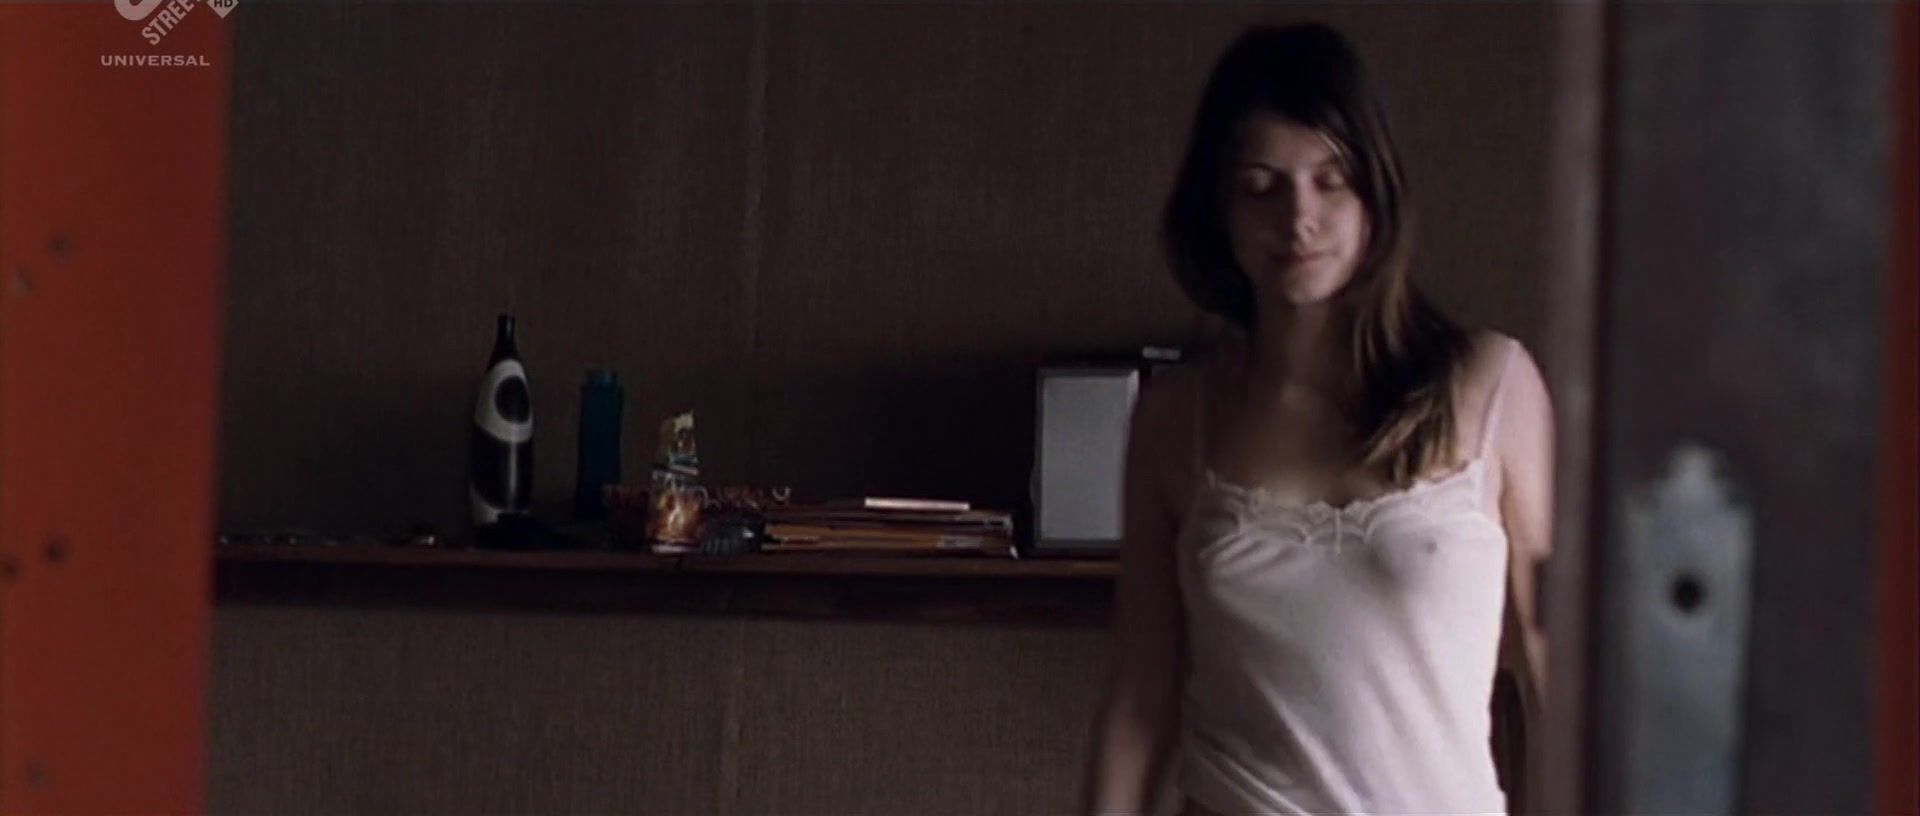 HomeVoyeurVideo Topless Melanie Laurent from Shower Video of the French movie "La chambre des morts" Babysitter - 1